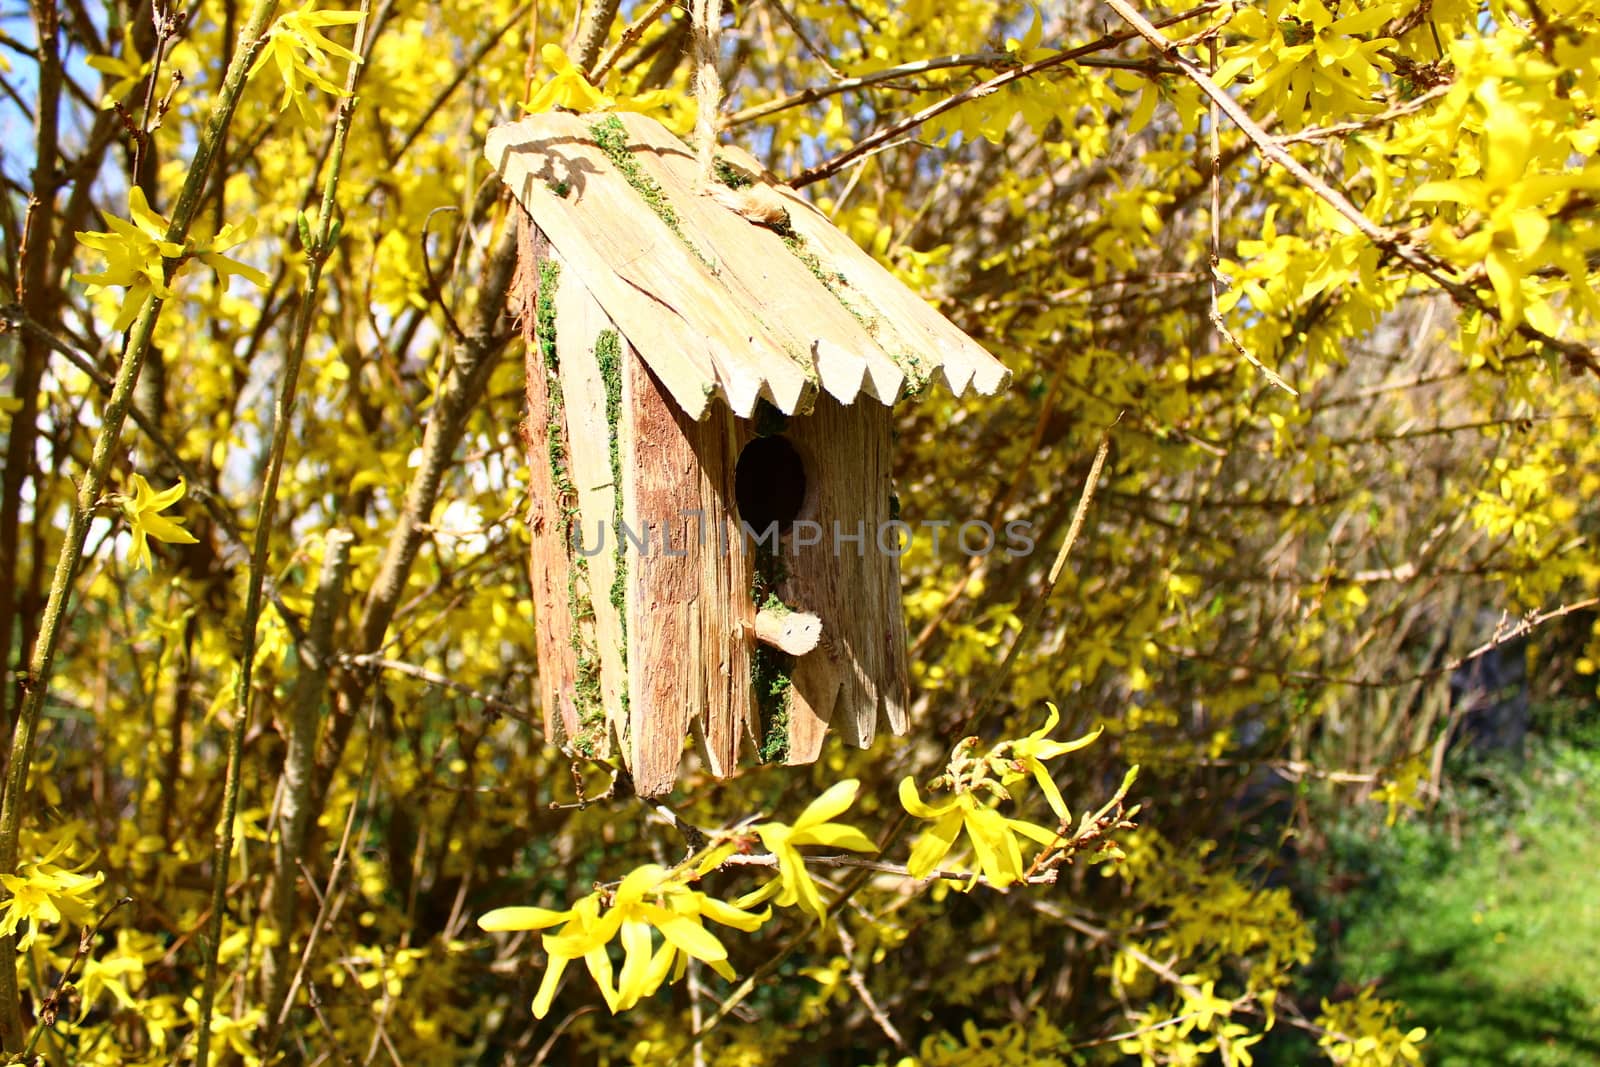 shows a the picture bird house in the blossoming forsythia.